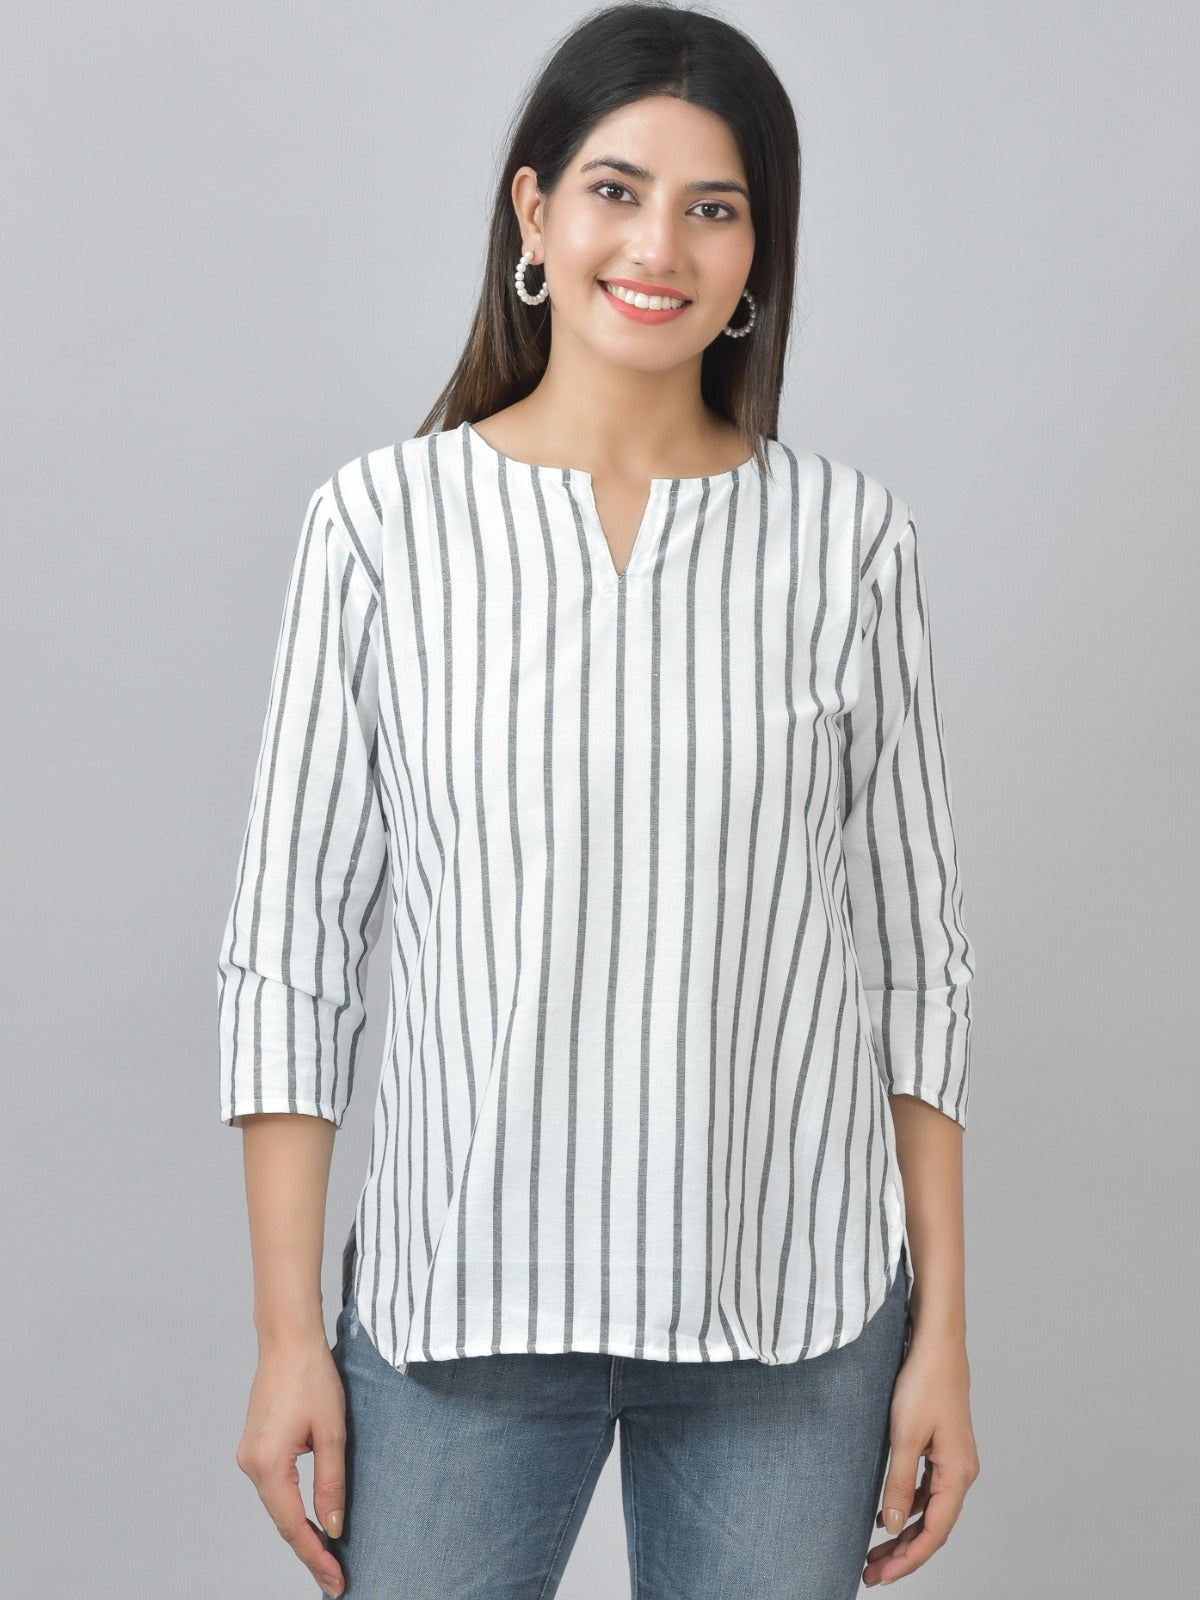 Pack Of 2 Black And Grey Striped Cotton Womens Top Combo